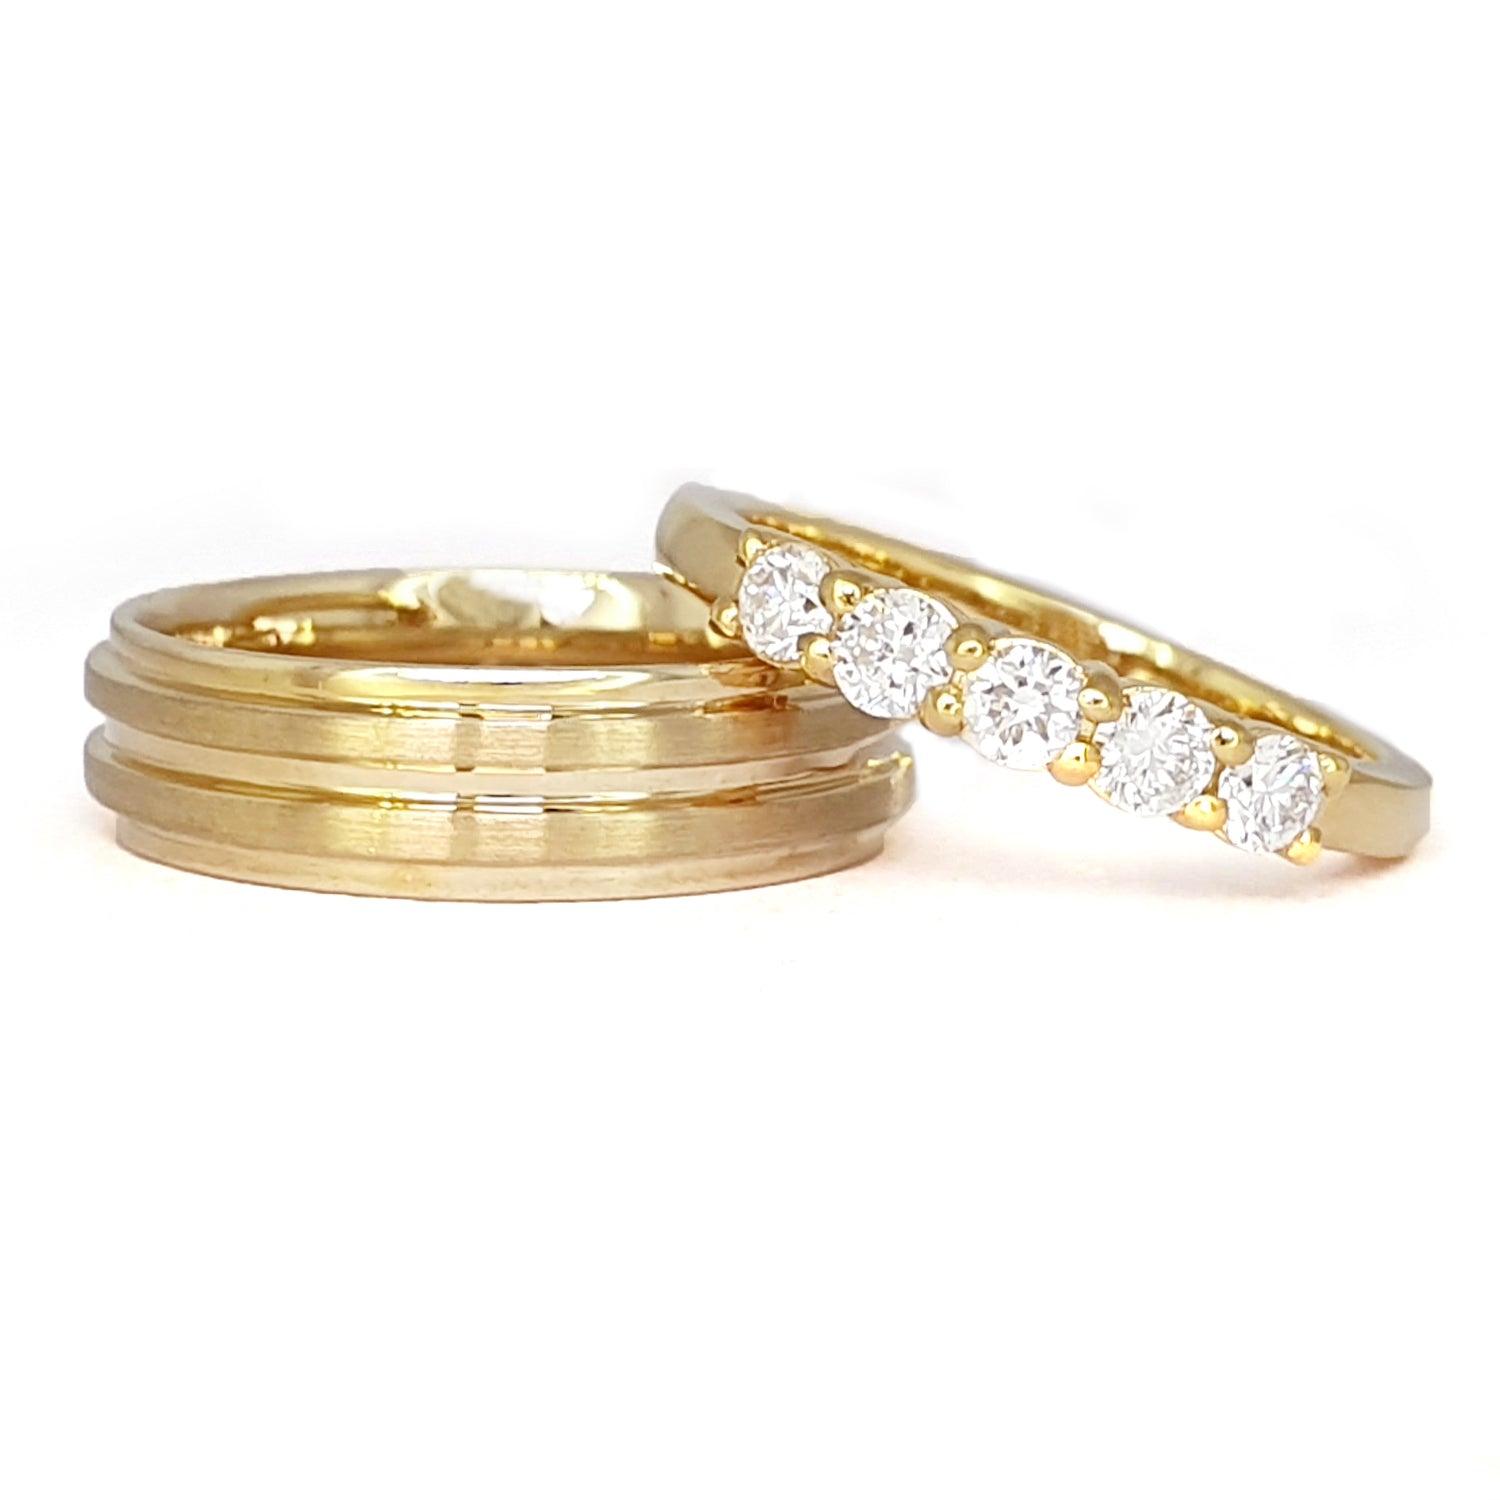 Matching Engagement Bands | 14k Gold Ring | Meicel Jewelry Store